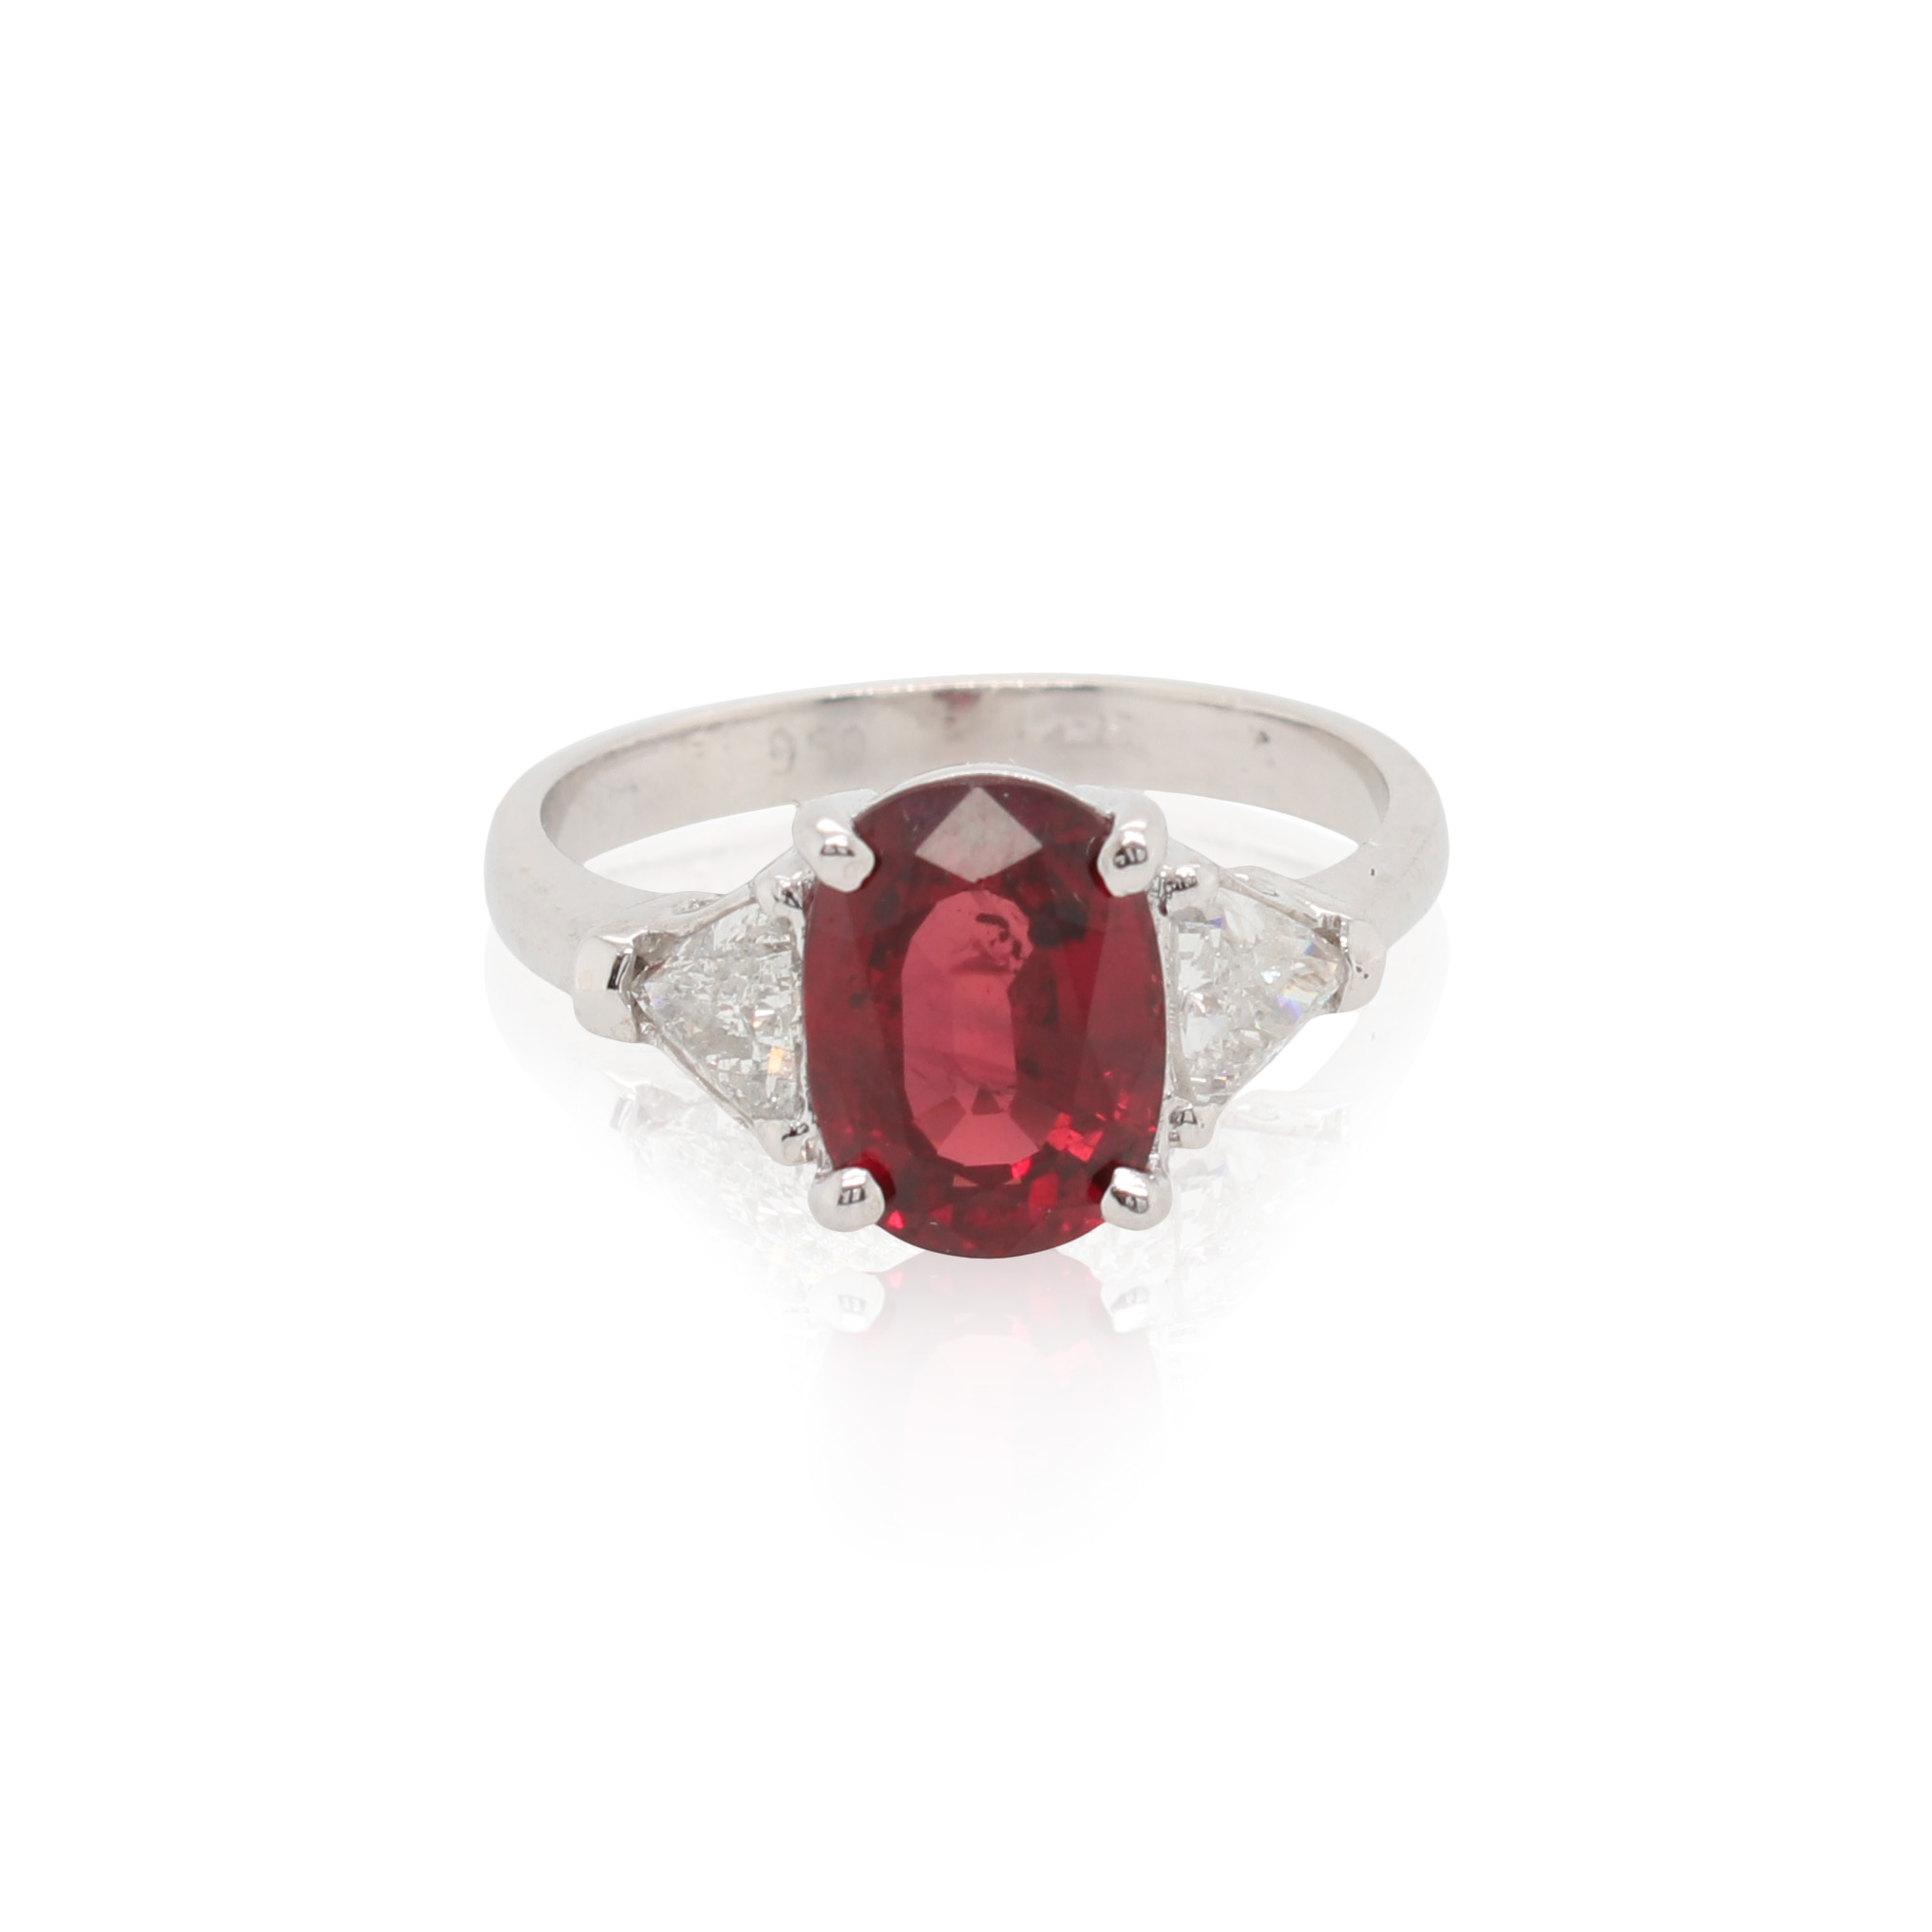 This ring is crafted from platinum and features a 3.17 carat oval ruby and 0.54 total carats of trillion side diamonds.